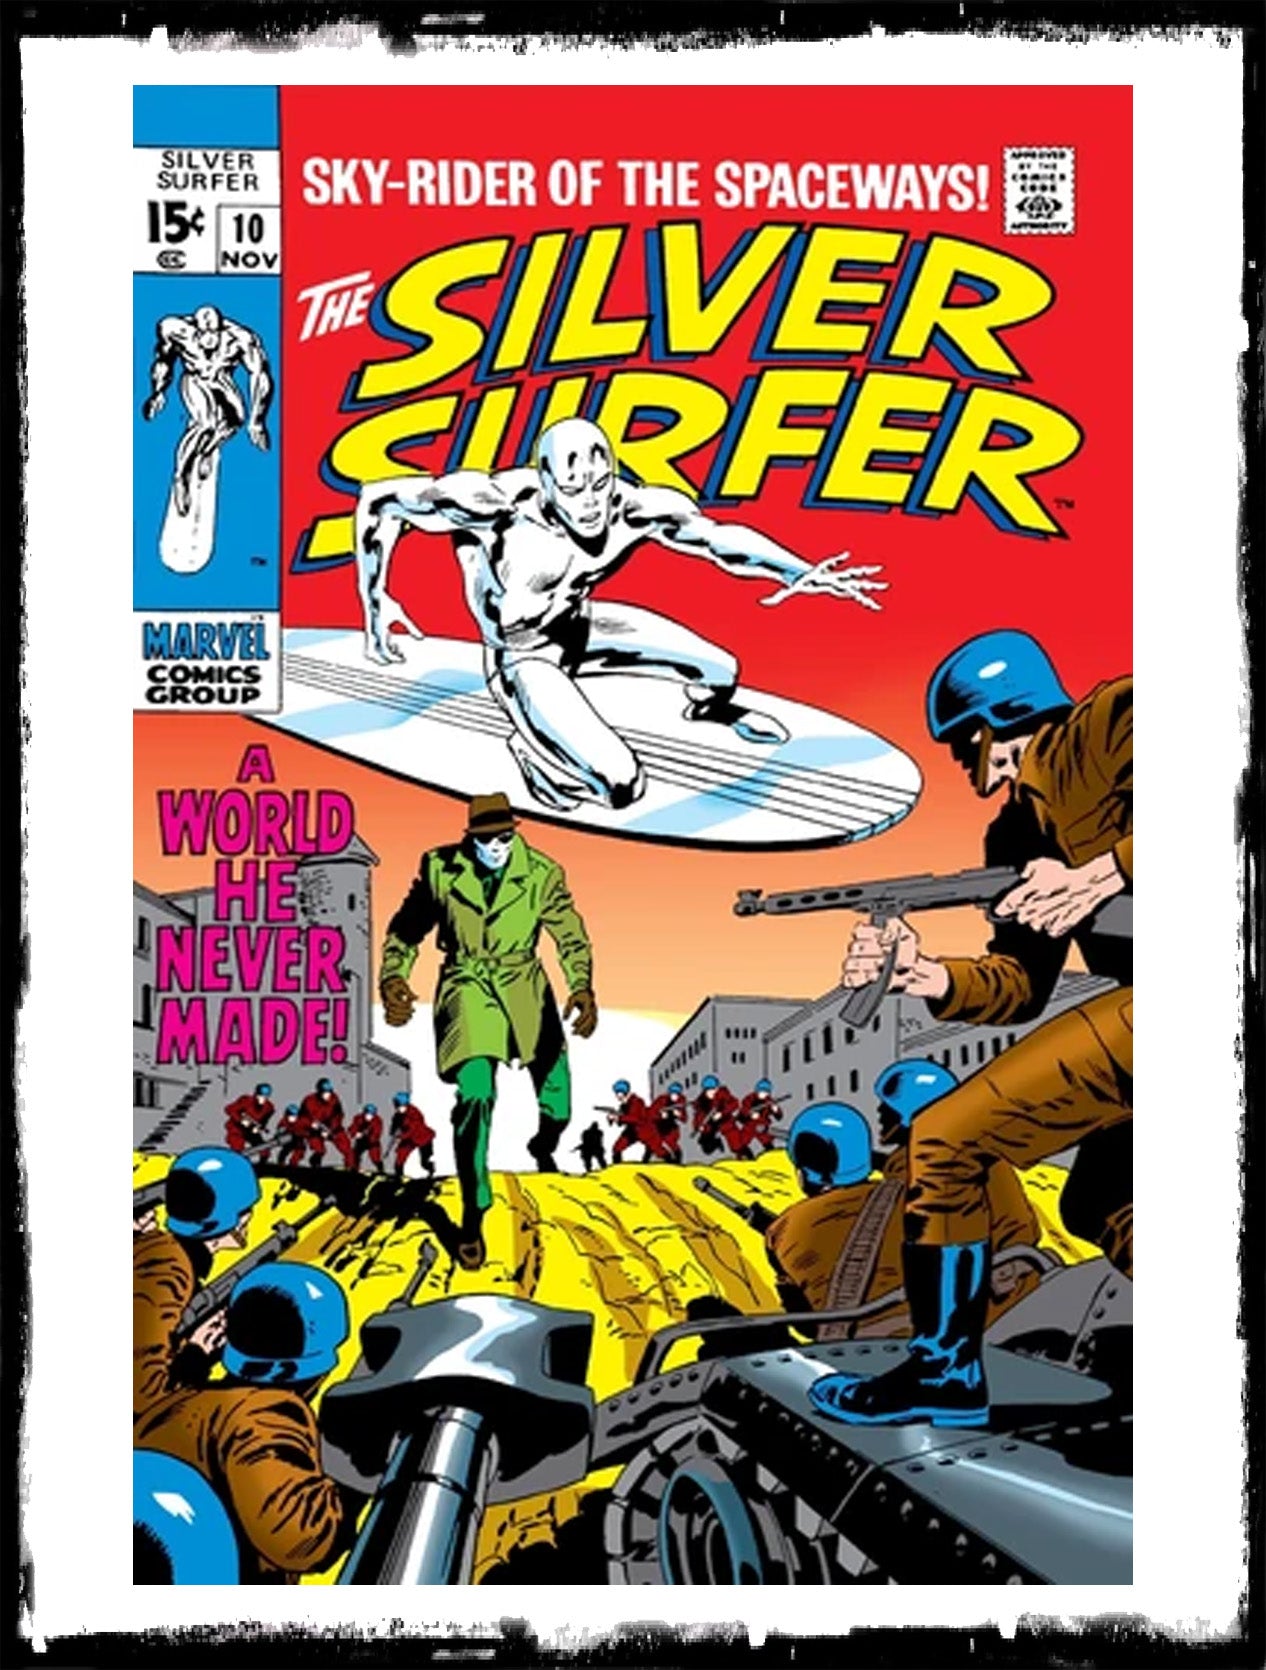 SILVER SURFER - #10 “A WORLD HE NEVER MADE!” (1969 - VF)